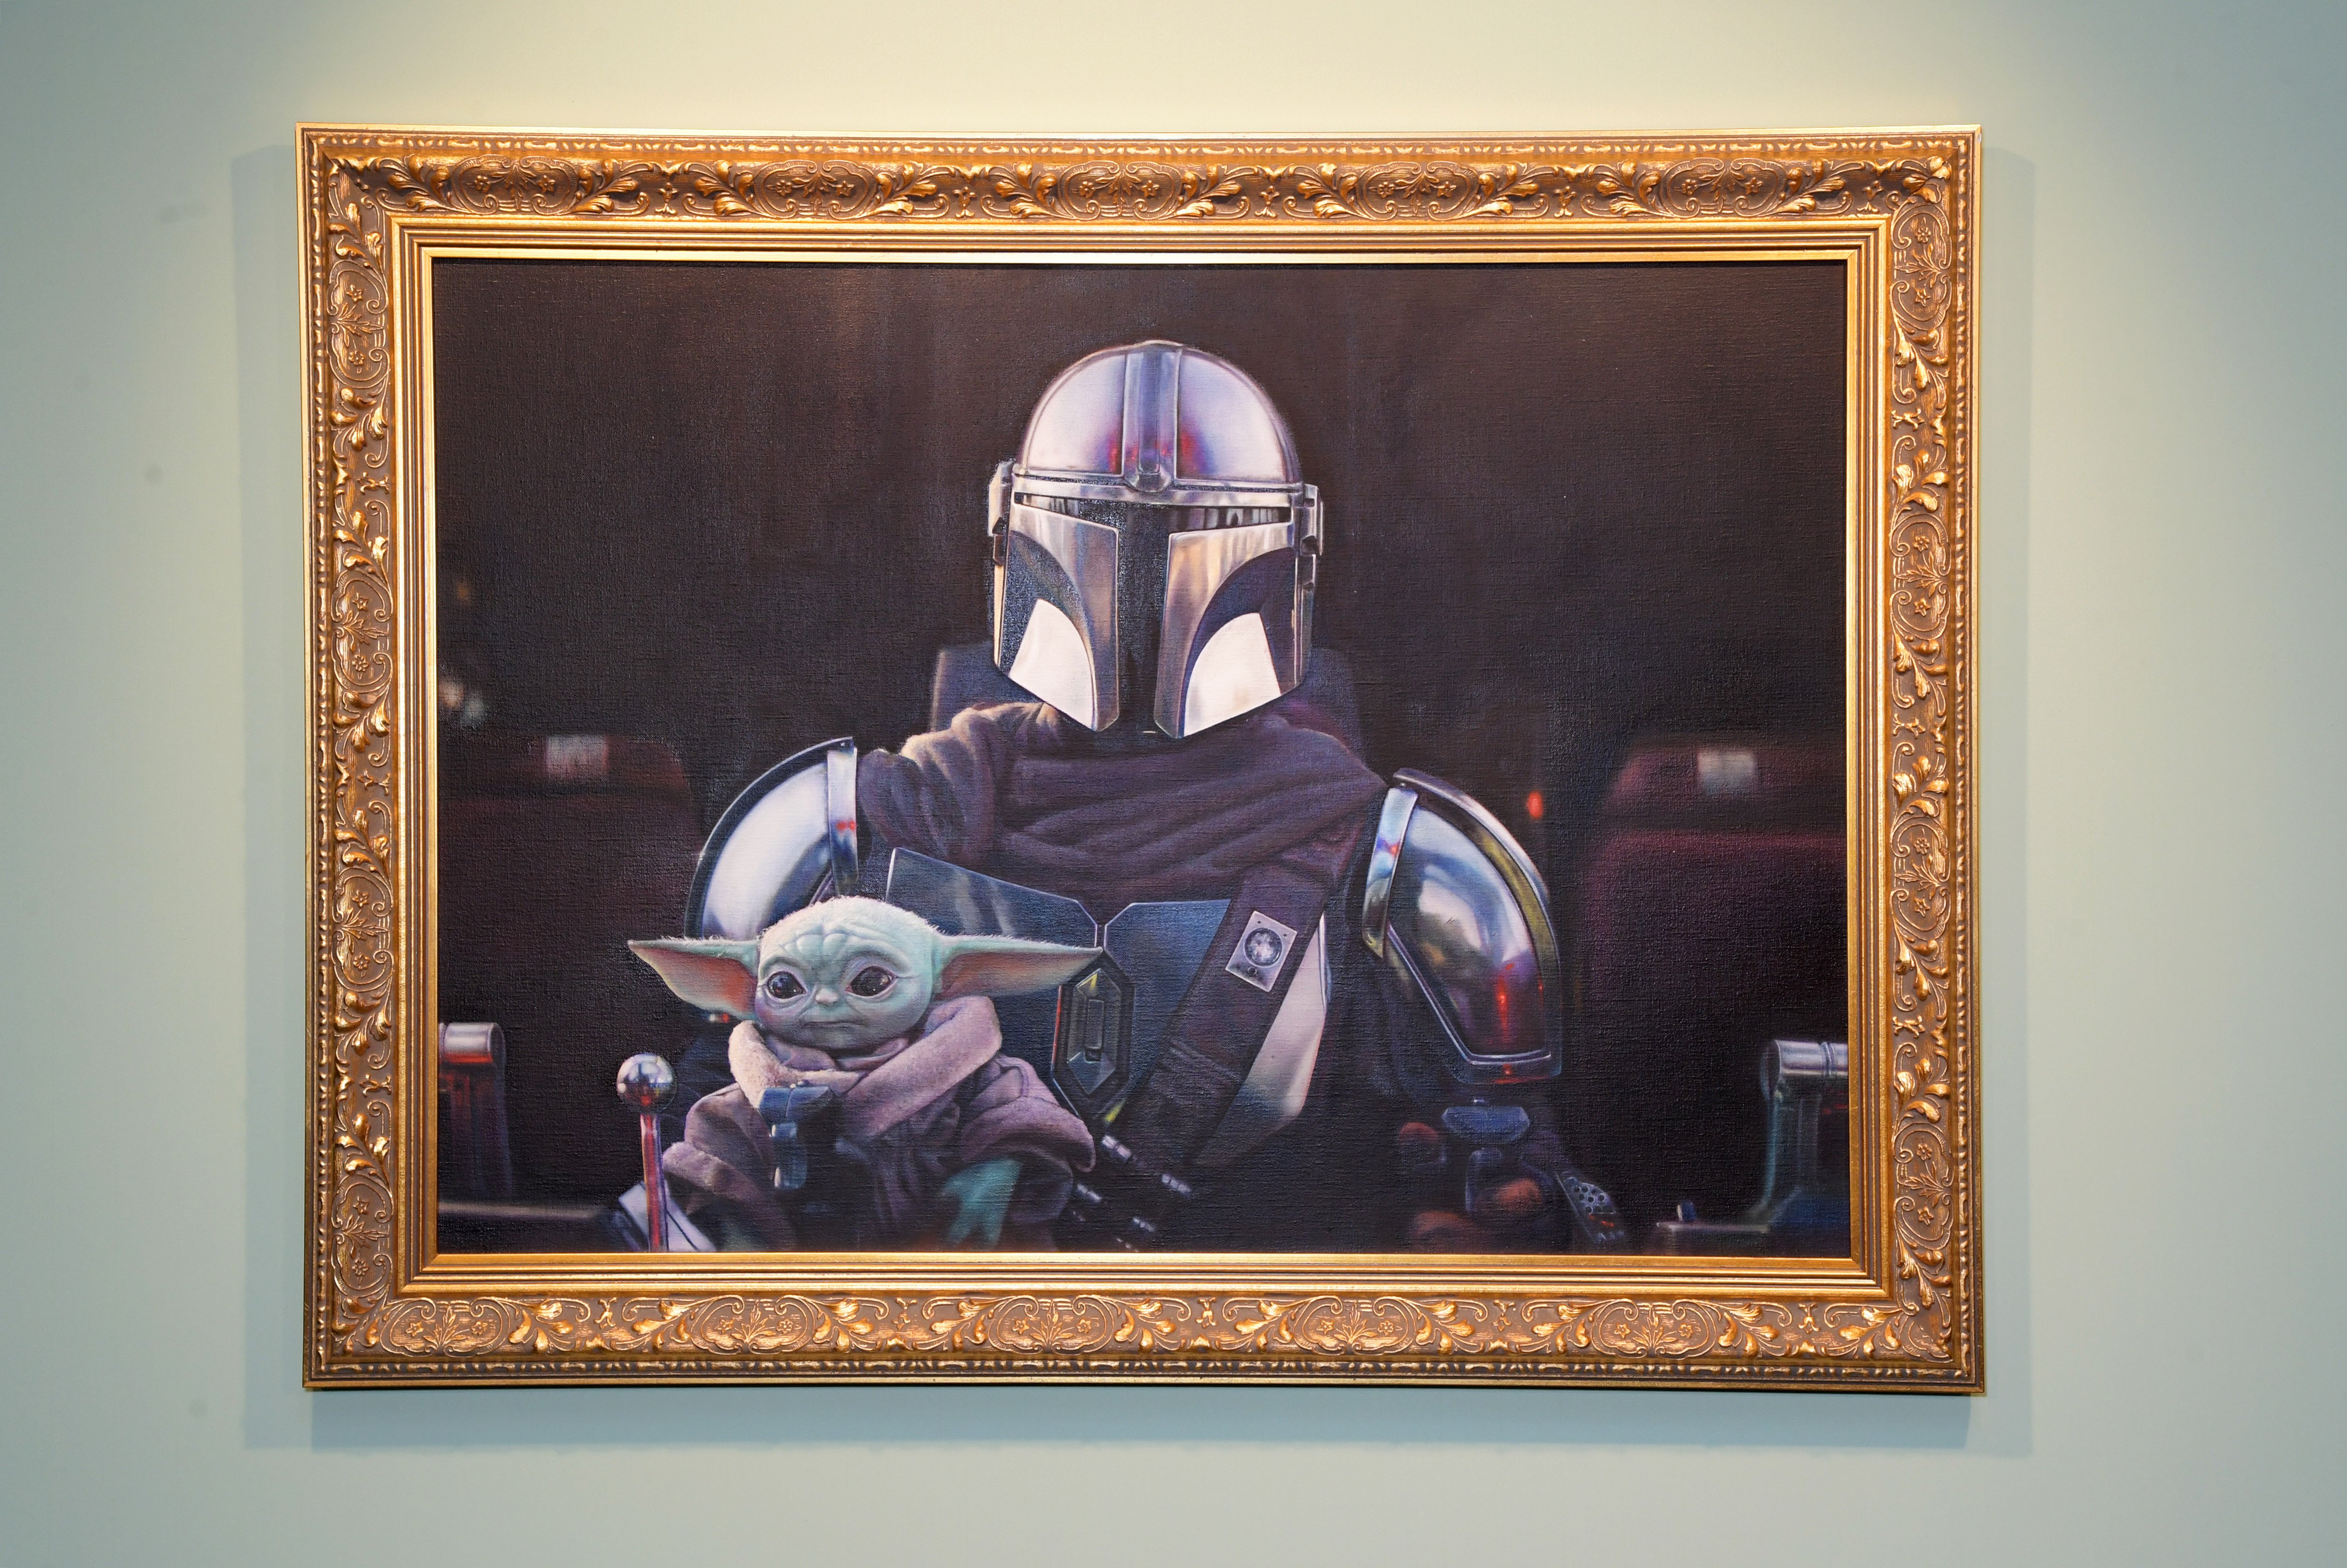 A private view of 'The Mandalorian And The Child,' a special portrait being unveiled in collaboration with the National Portrait Gallery